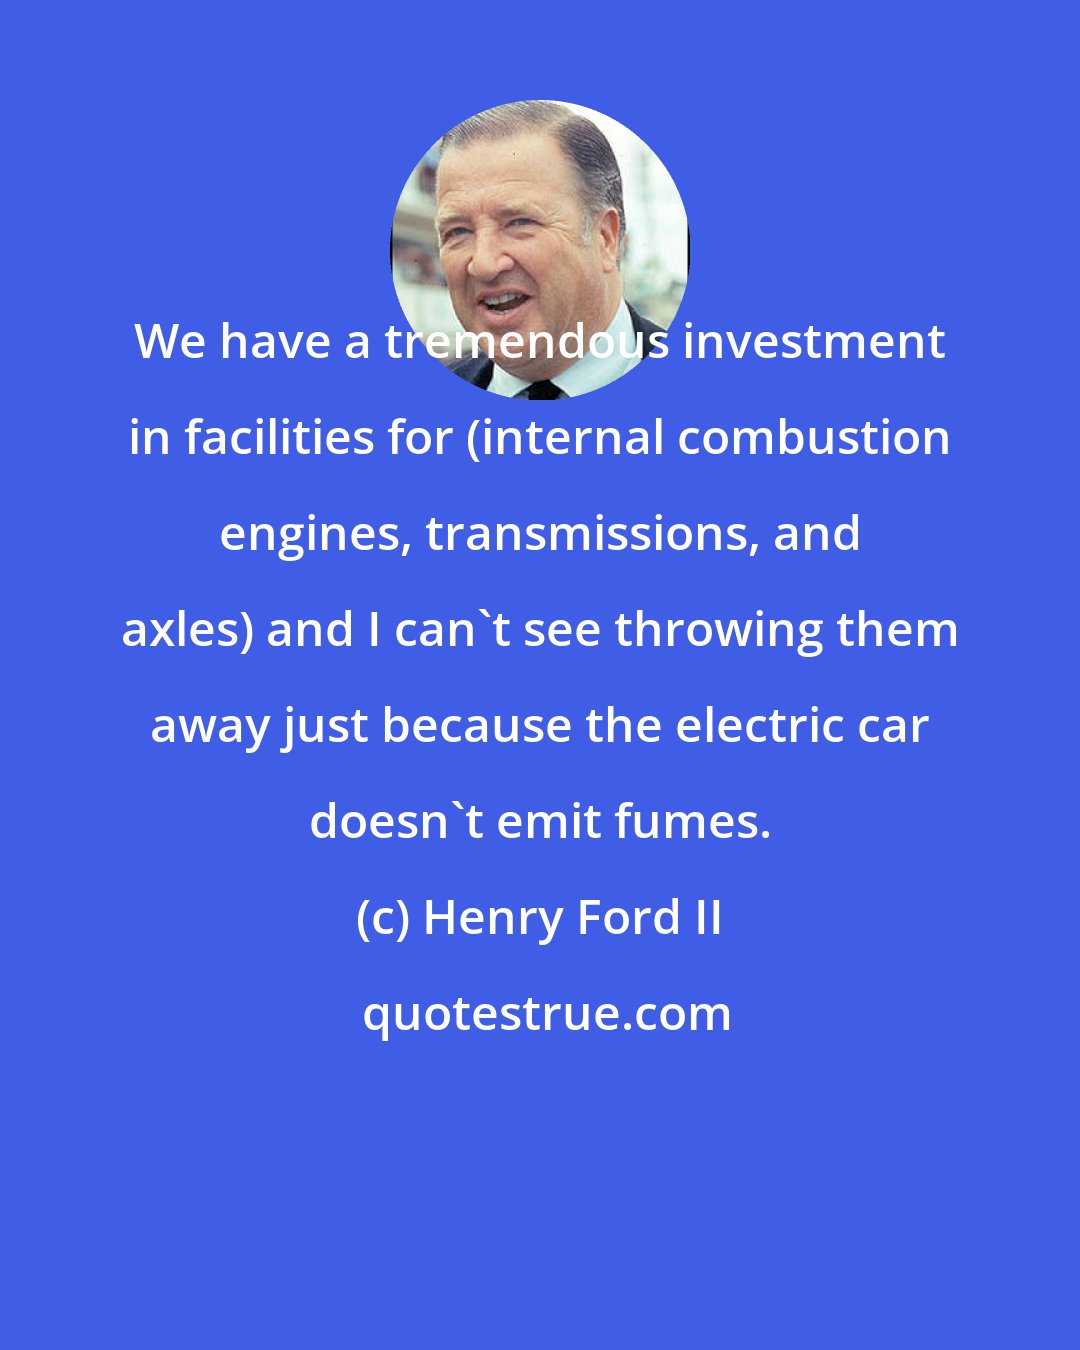 Henry Ford II: We have a tremendous investment in facilities for (internal combustion engines, transmissions, and axles) and I can't see throwing them away just because the electric car doesn't emit fumes.